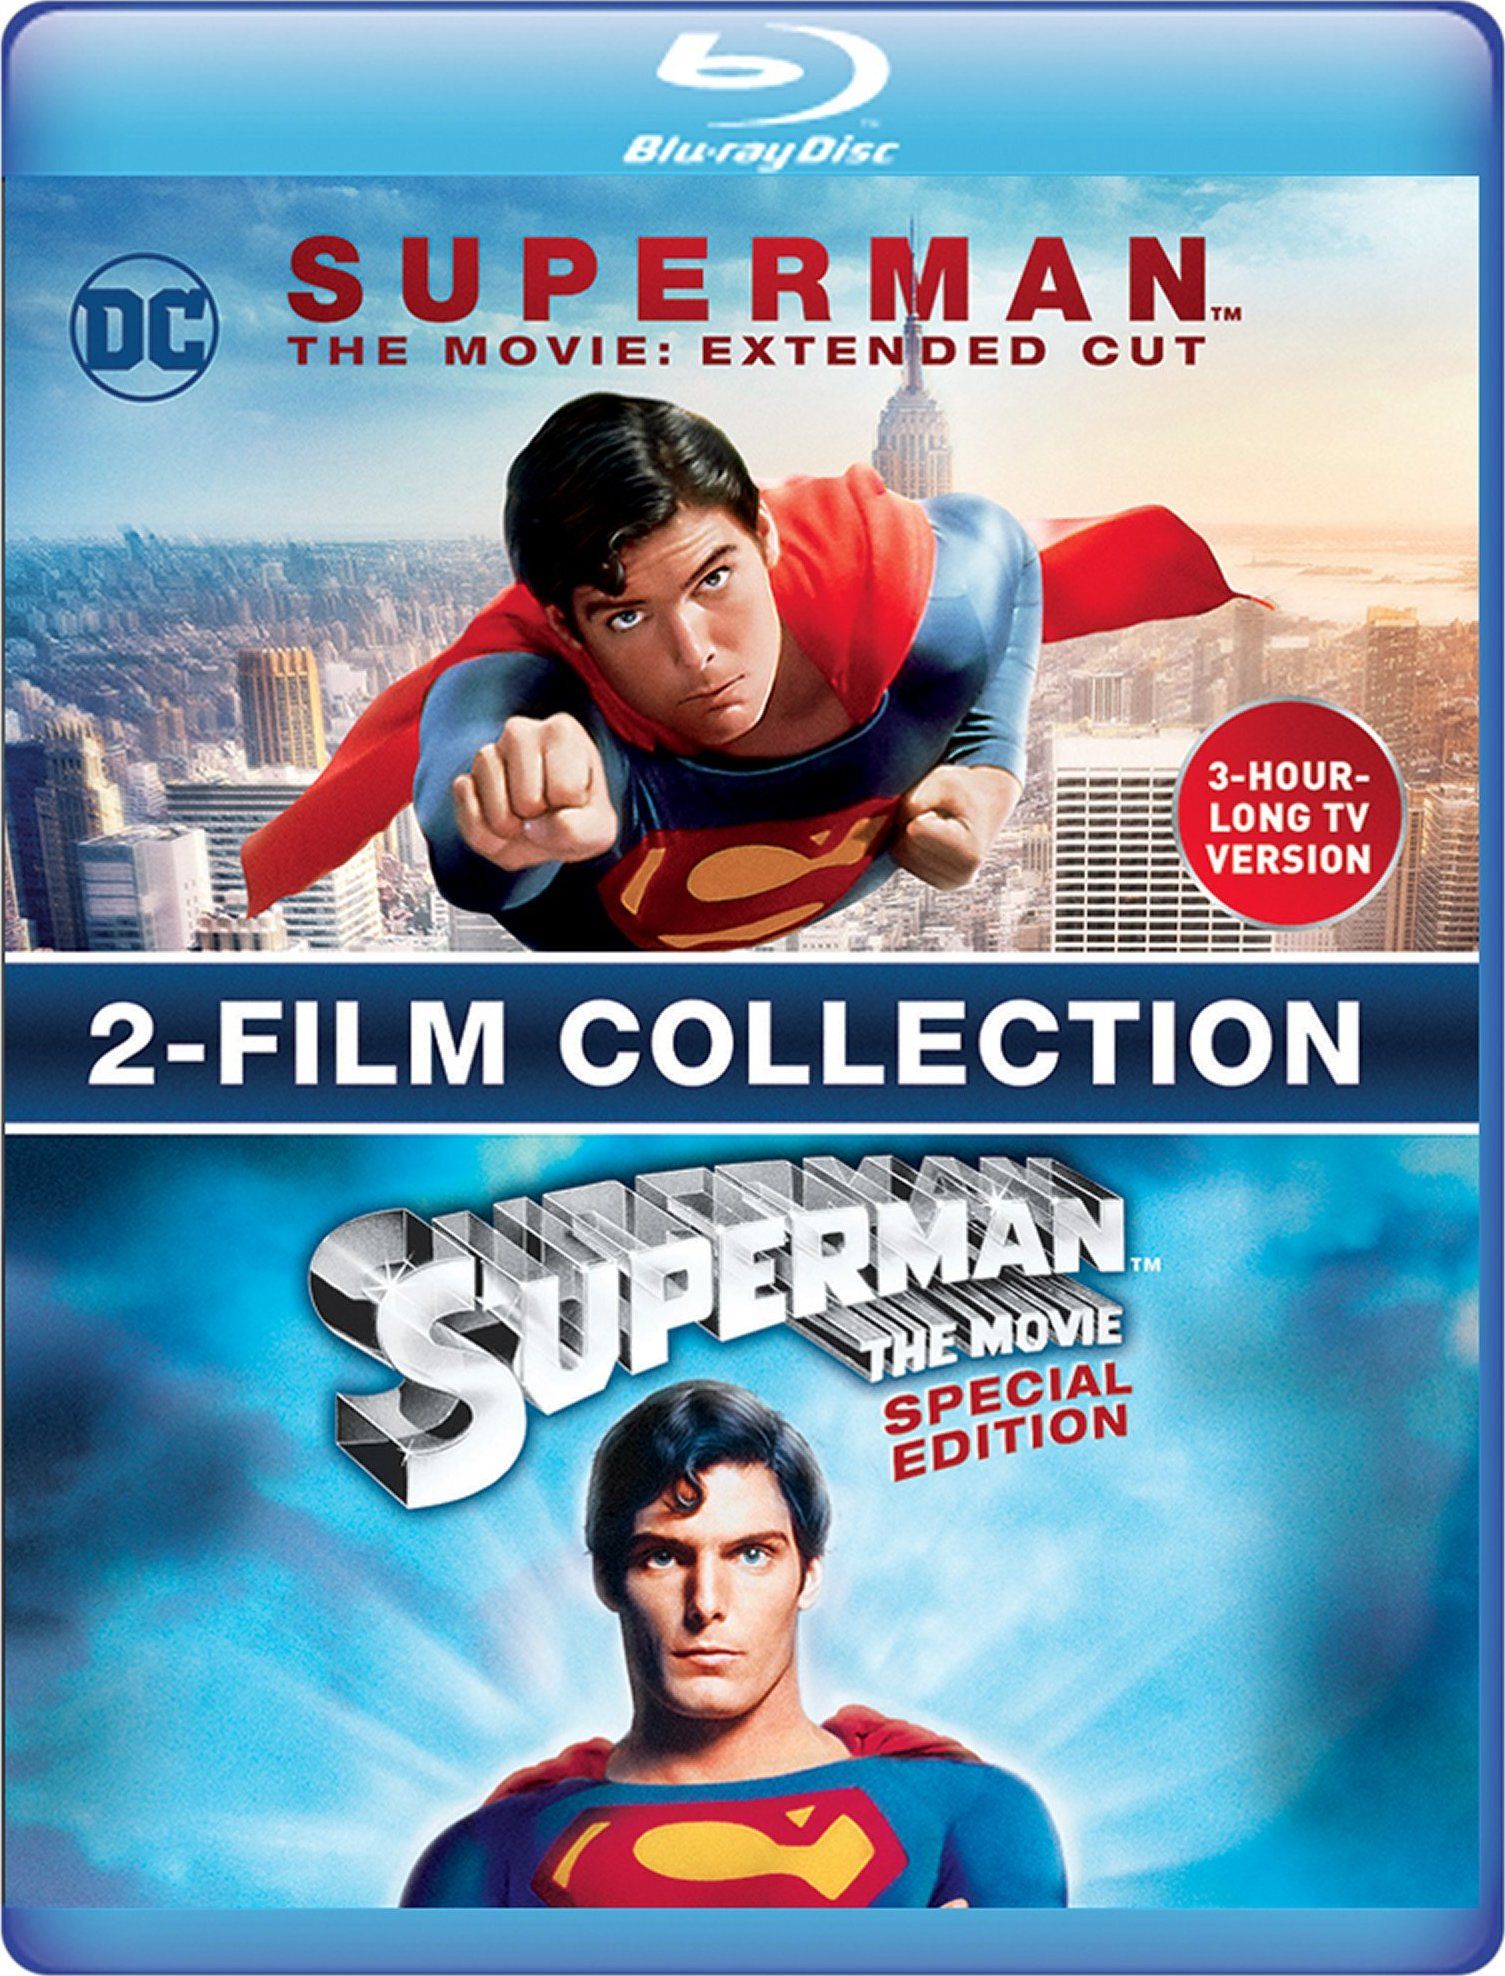 Superman The Movie Blu-ray Extended Cut (photo: Warner Home Entertainment)